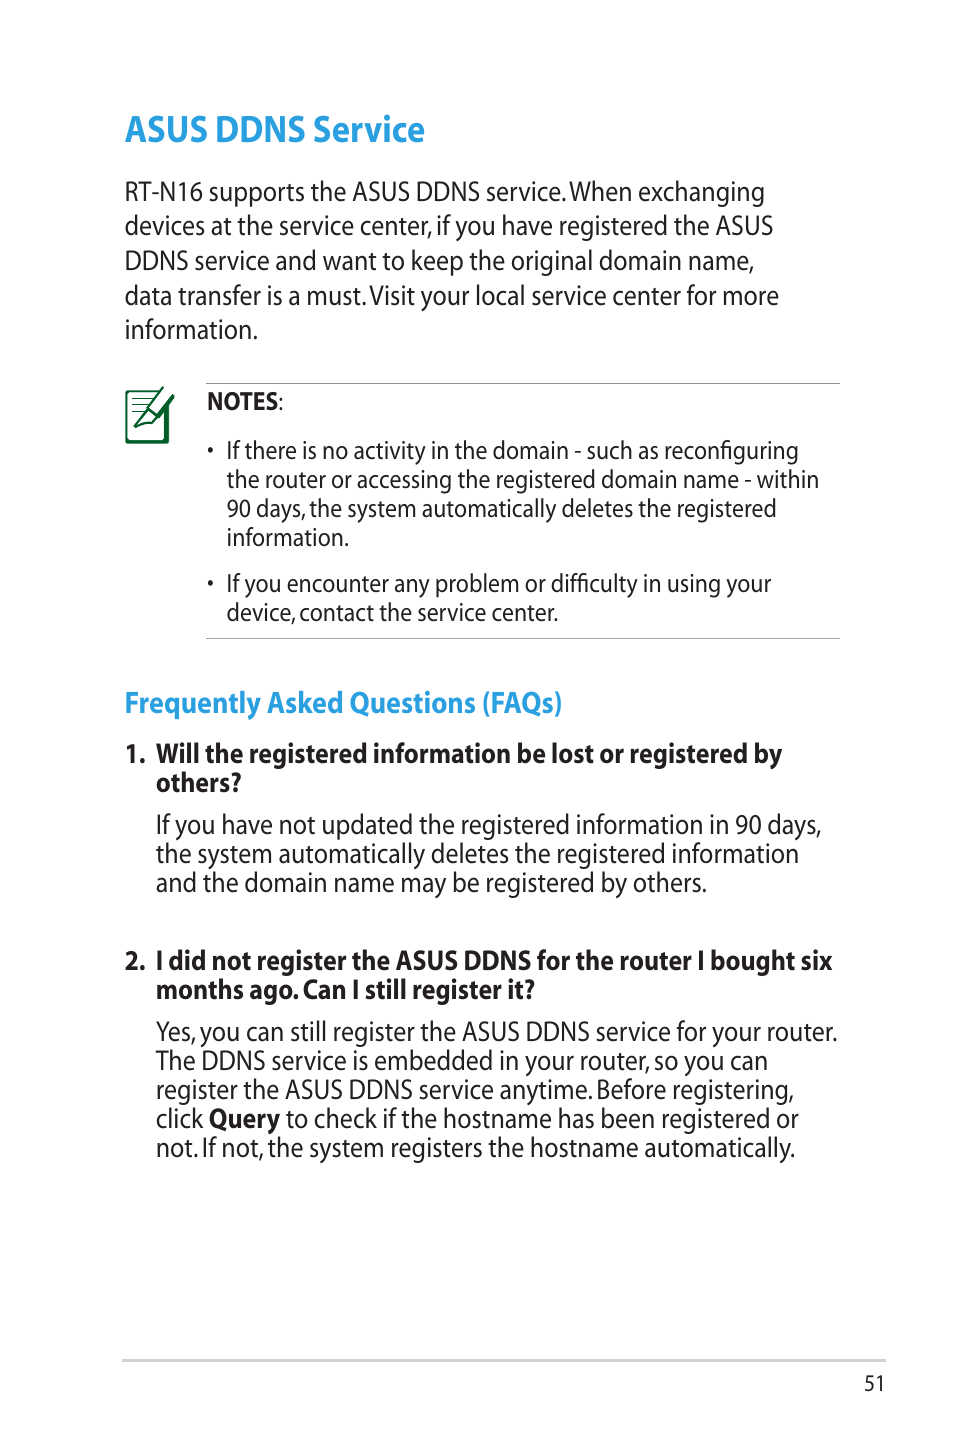 Asus ddns service, Frequently asked questions (faqs) | Asus RT-N16 User  Manual | Page 51 / 69